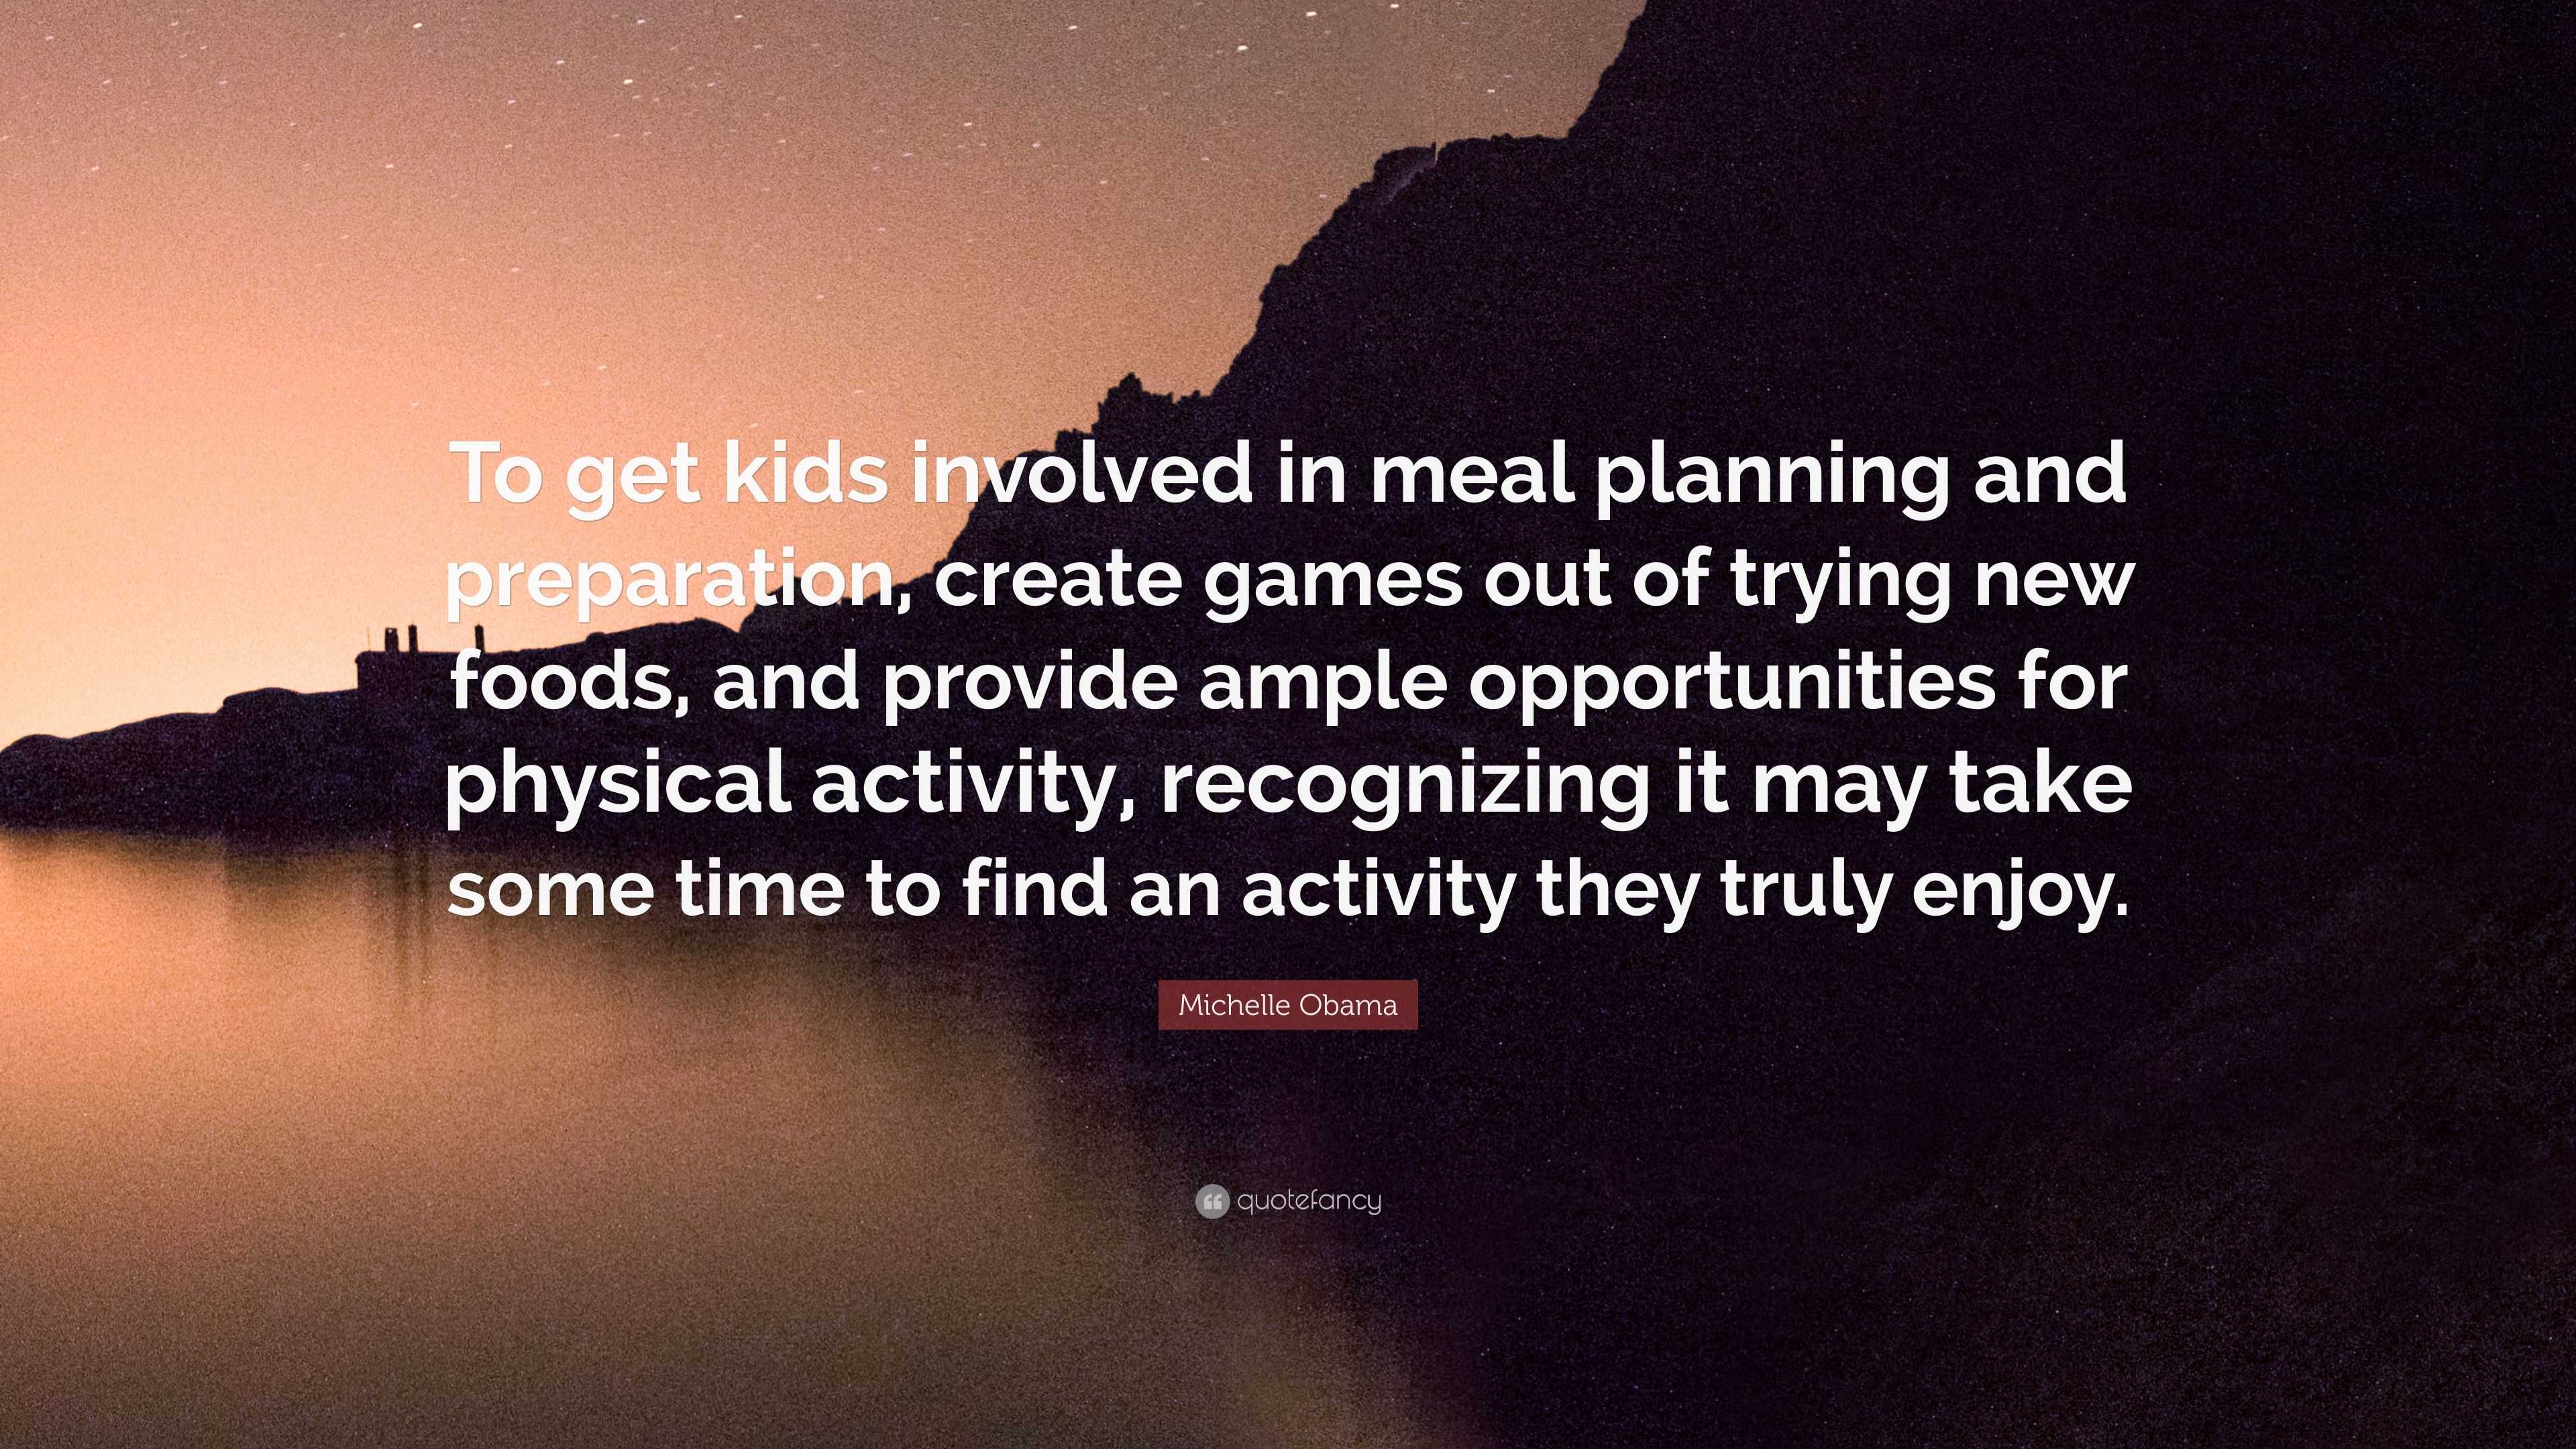 Michelle Obama Quote: “To get kids involved in meal planning and